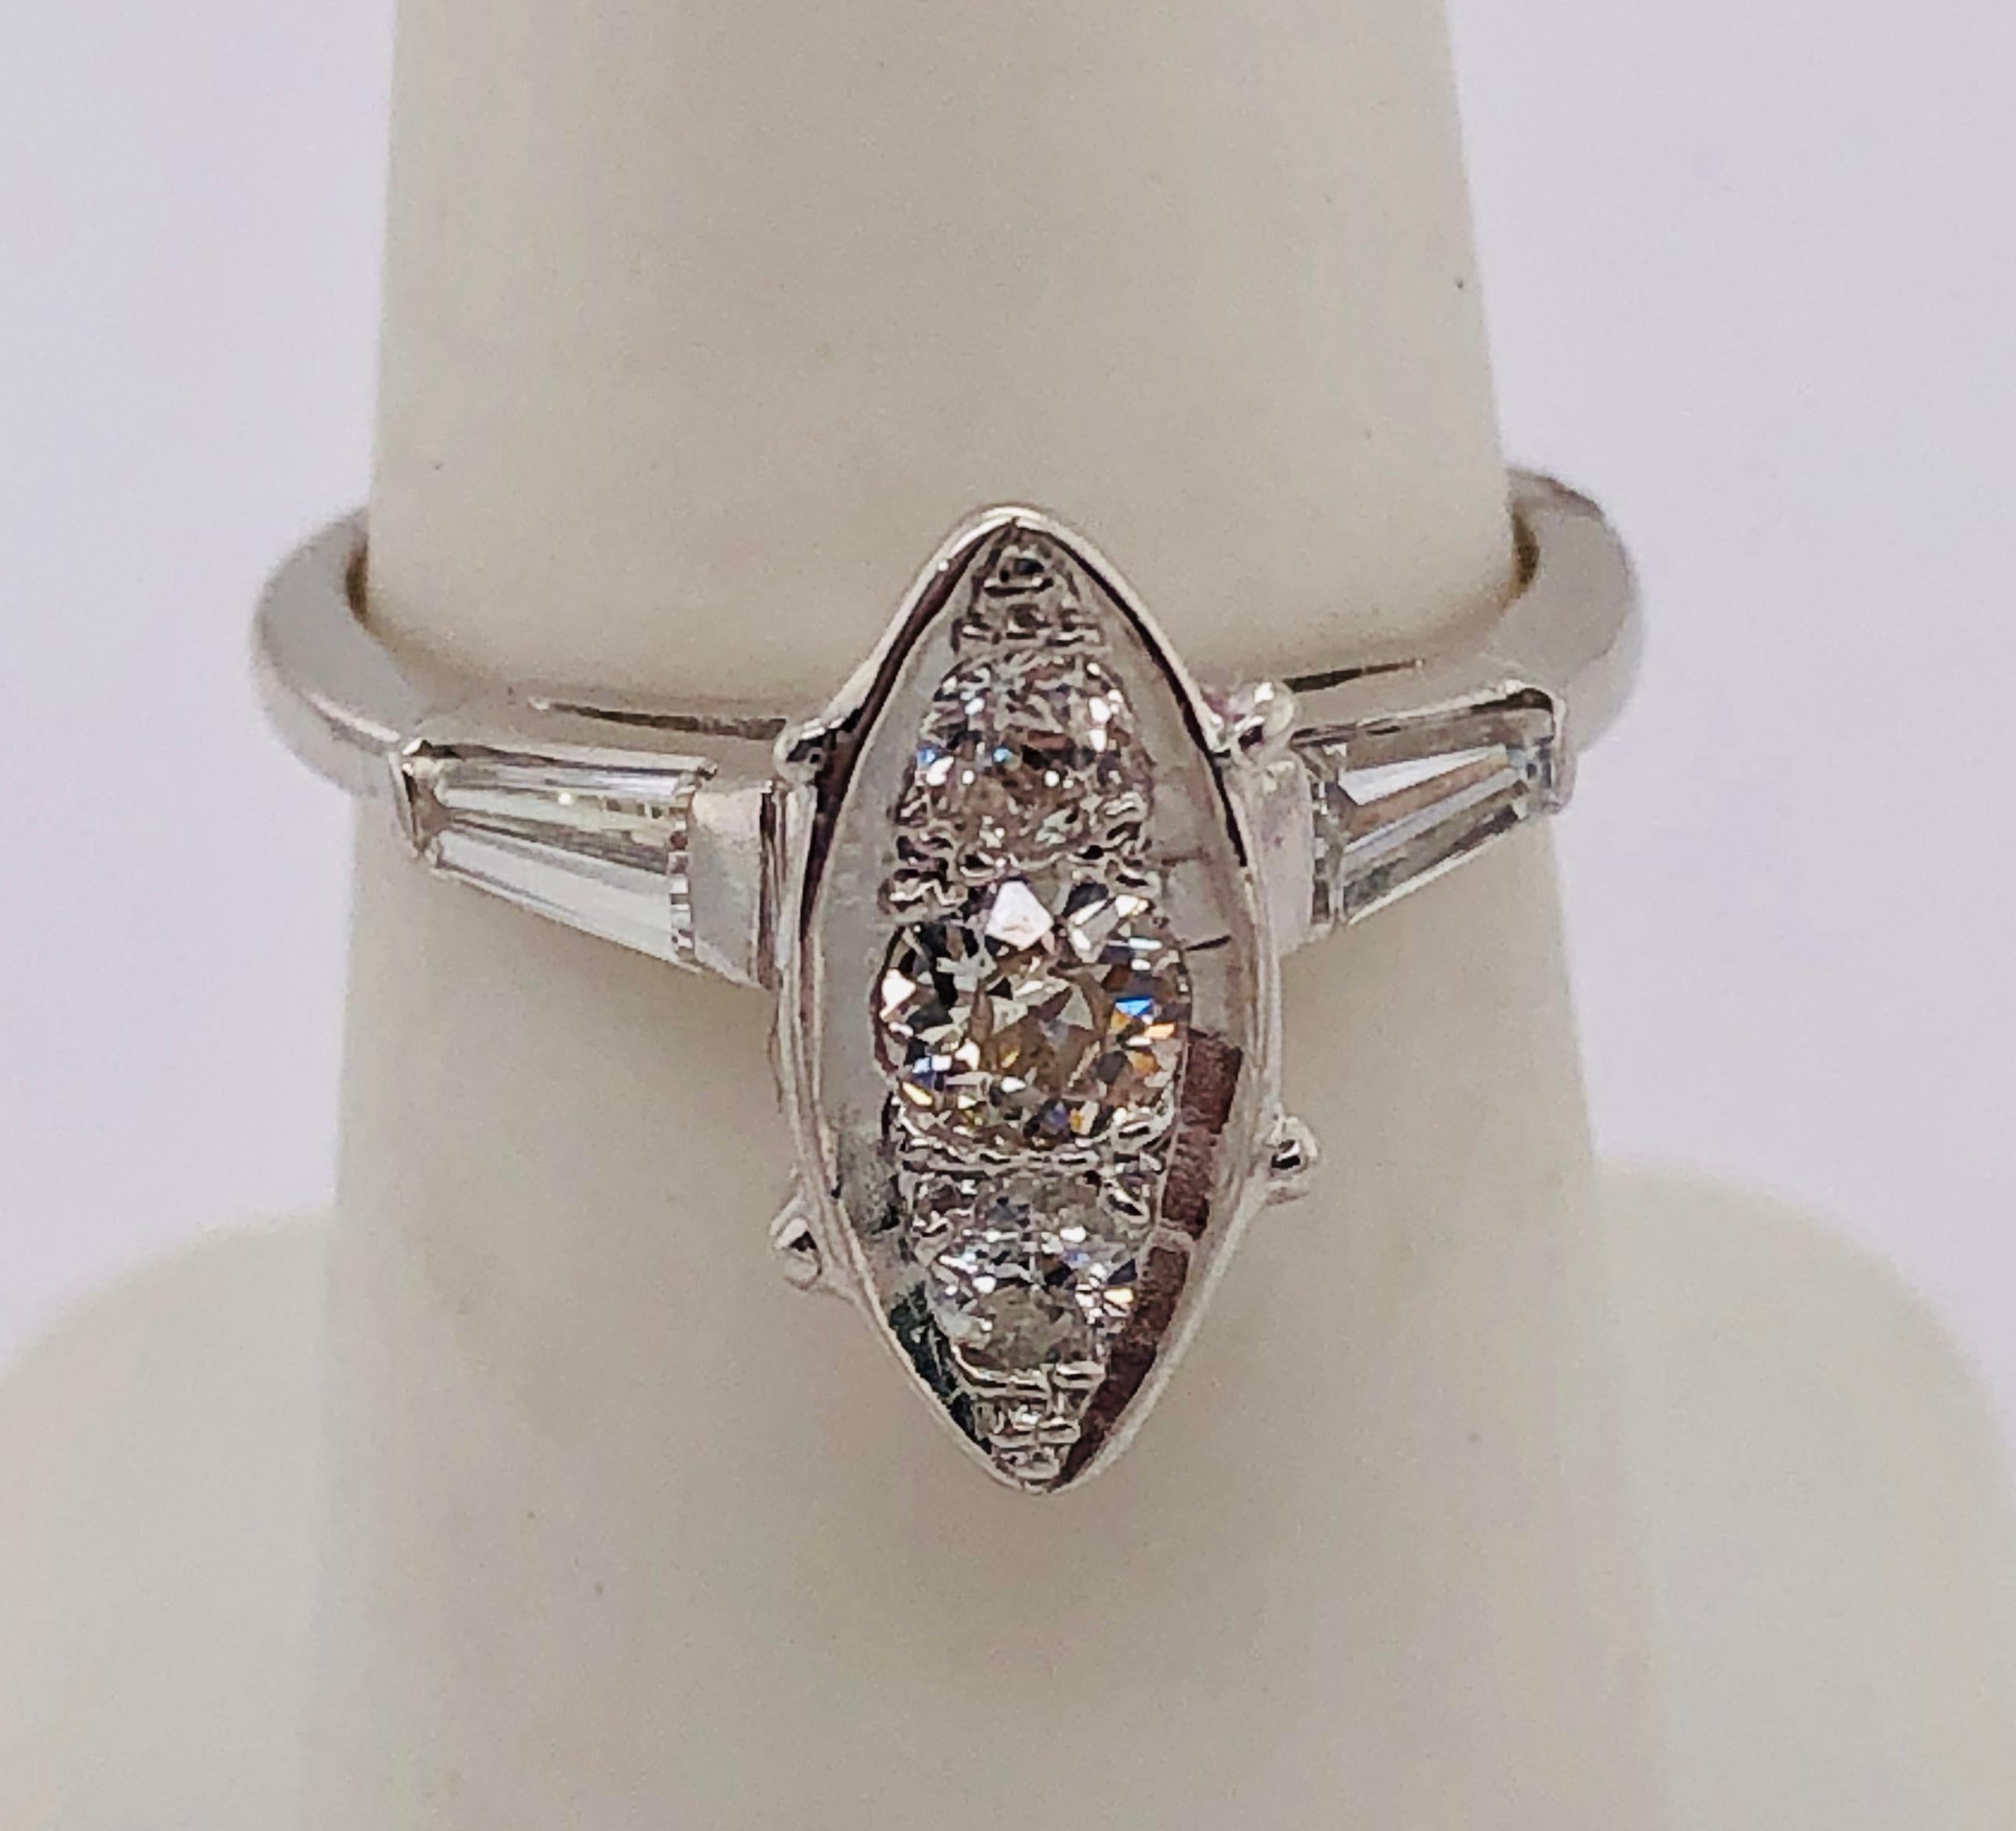 14Kt White Gold Engagement Ring with Round and Baguette Cut Diamonds 1.00 Total Diamond weight
Size 6.5 with 4.48 grams Total weight.